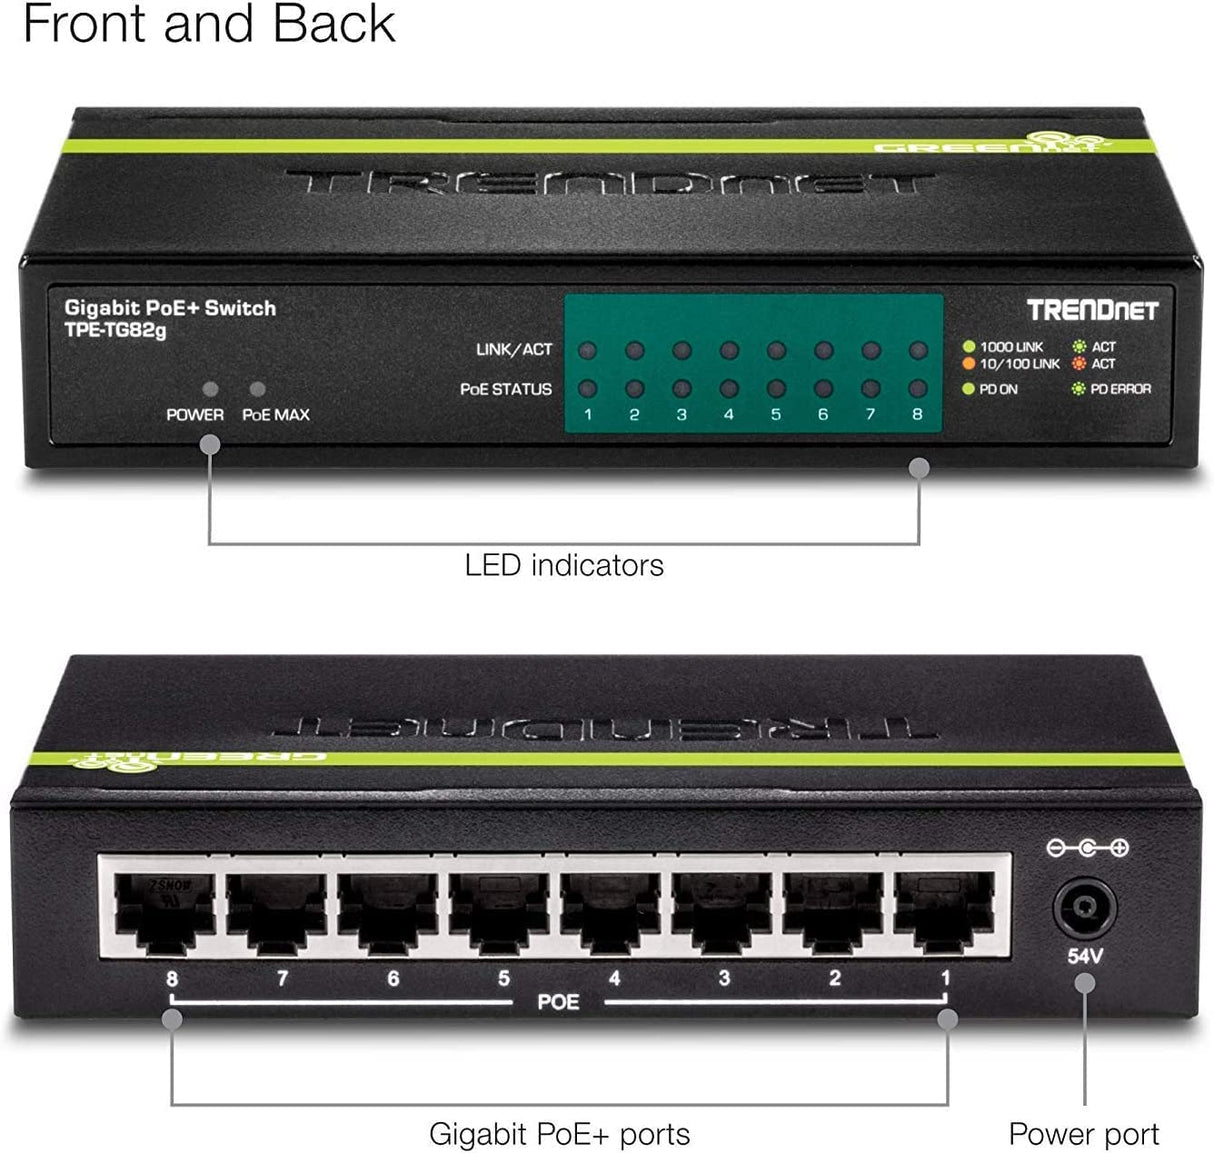 TRENDnet 8-Port GREENnet Gigabit PoE+ Switch, Supports PoE and PoE+ Devices, 61W PoE Budget, 16Gbps Switching Capacity, Data &amp; Power Via Ethernet to PoE Access Points &amp; IP Cameras, Black, TPE-TG82G 61W 8-Port